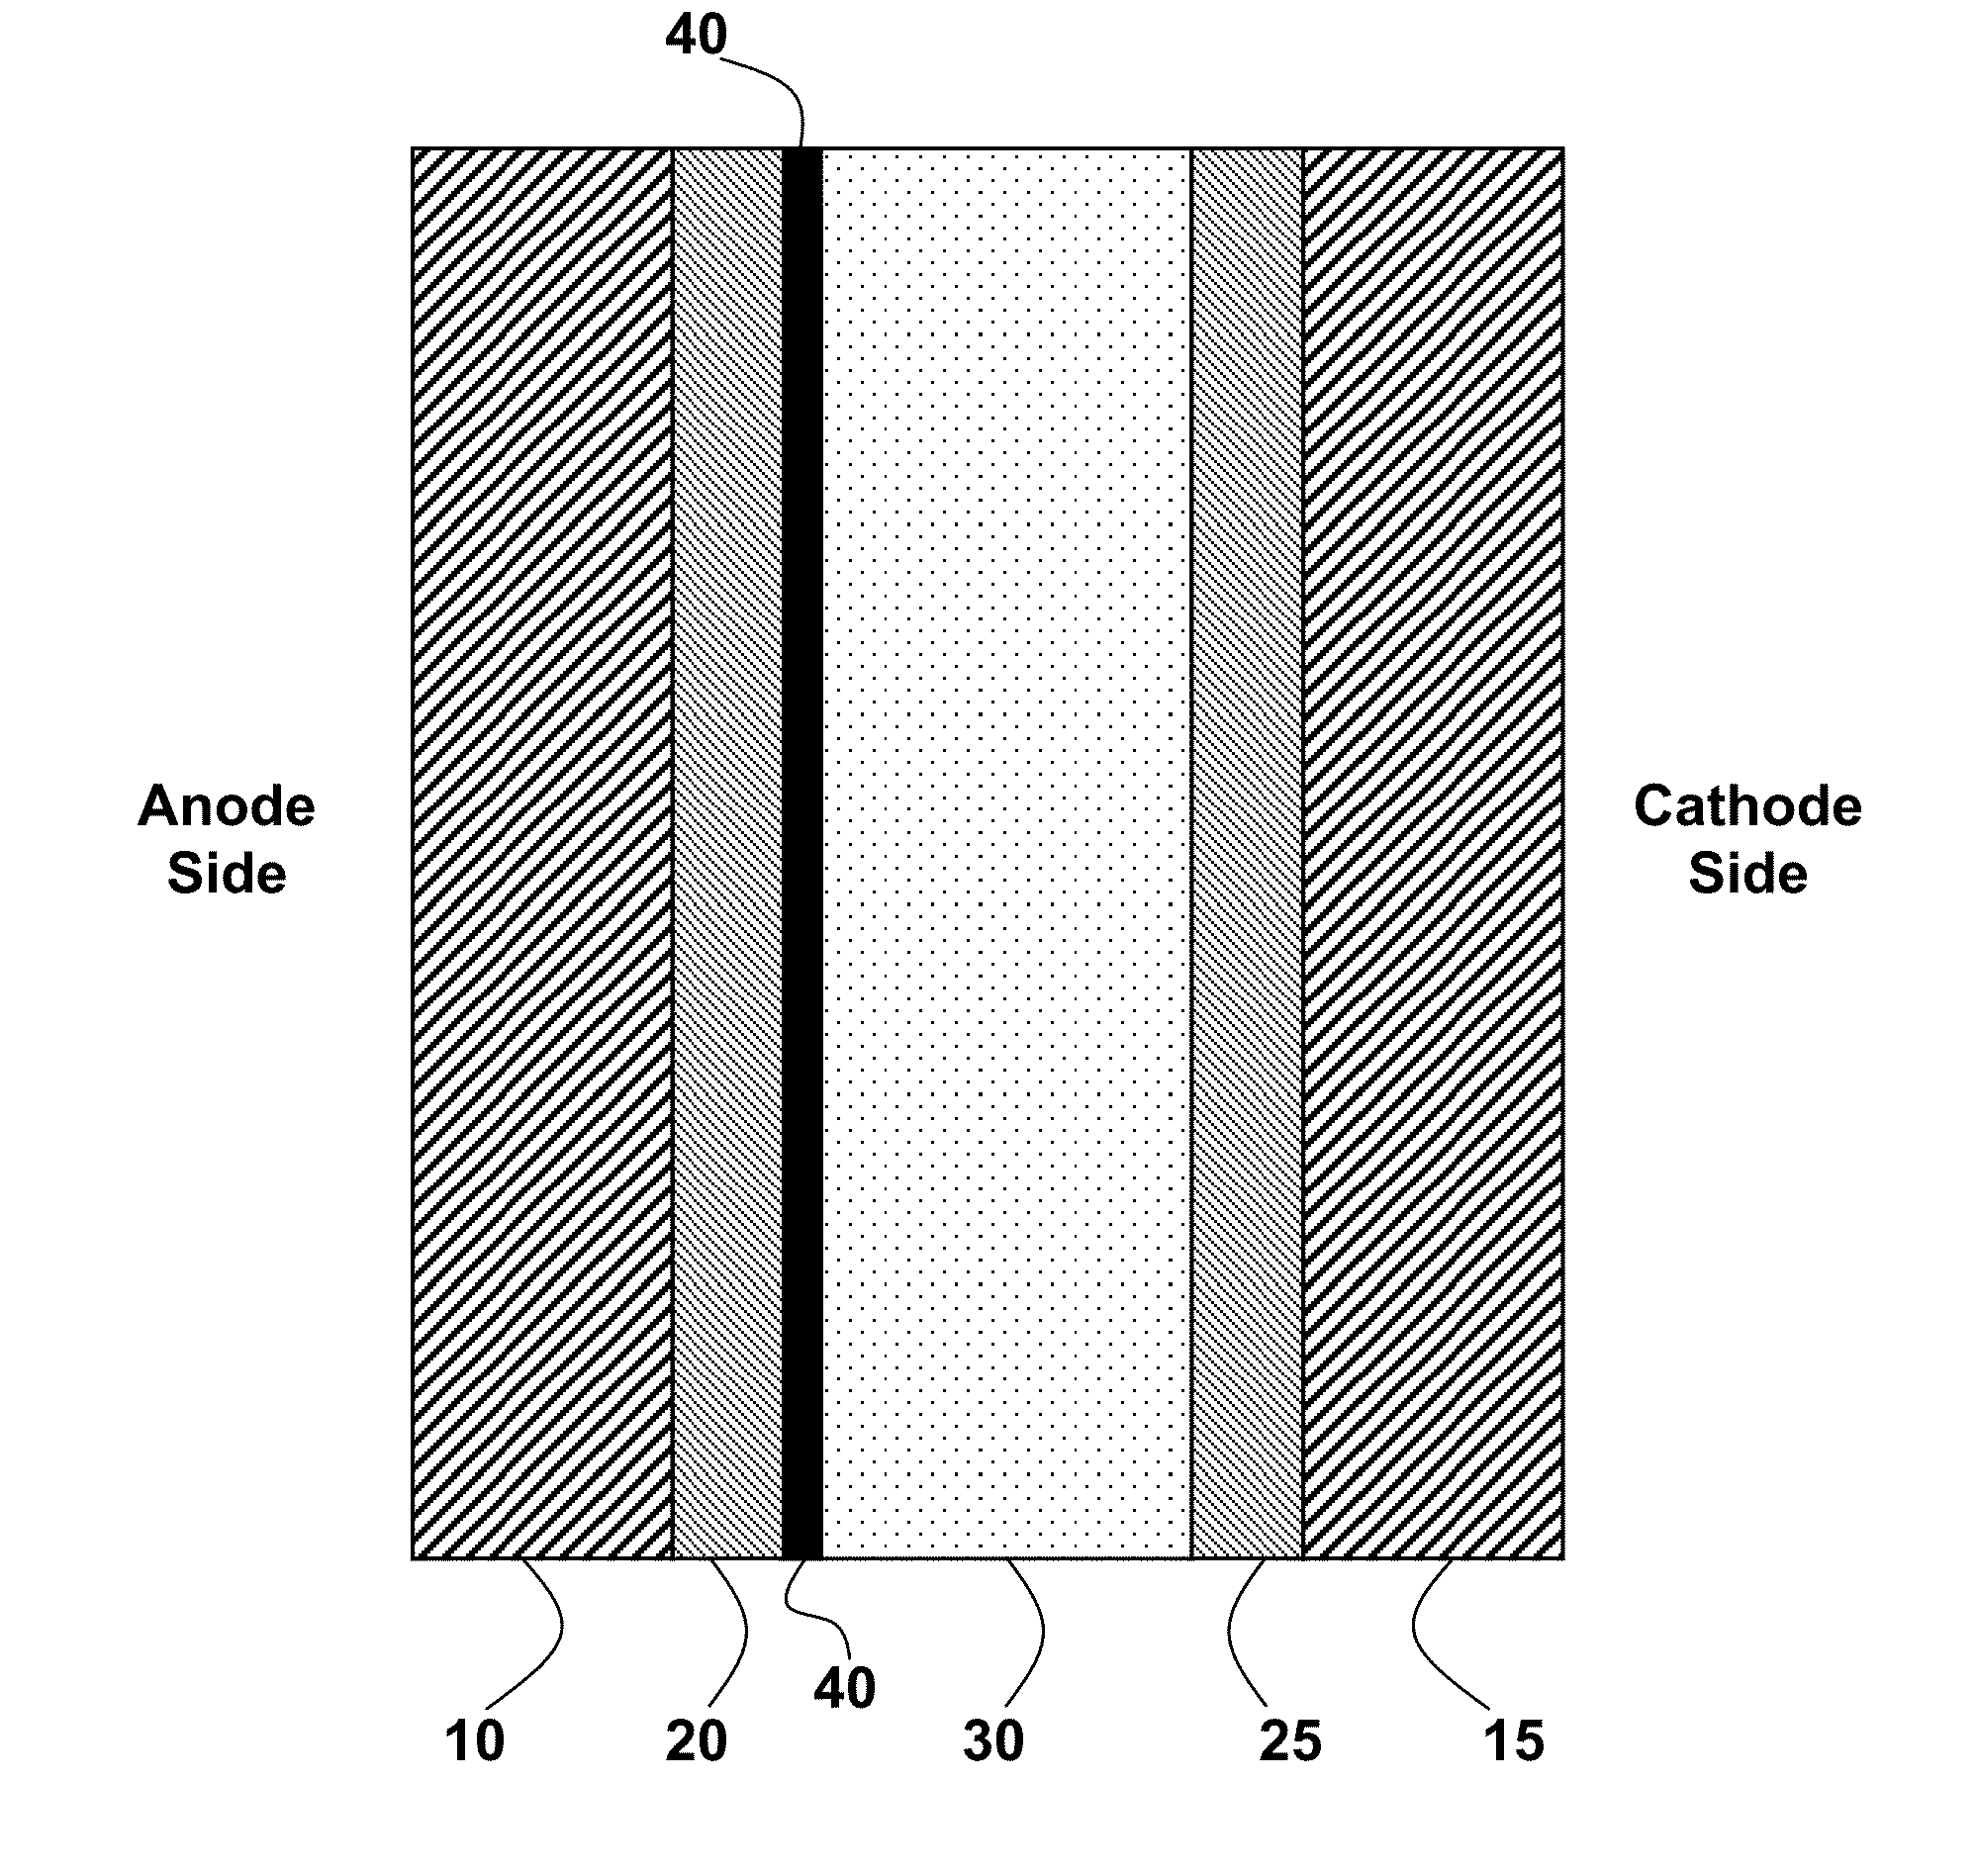 Methods for fabricating inorganic proton-conducting coatings for fuel-cell membranes